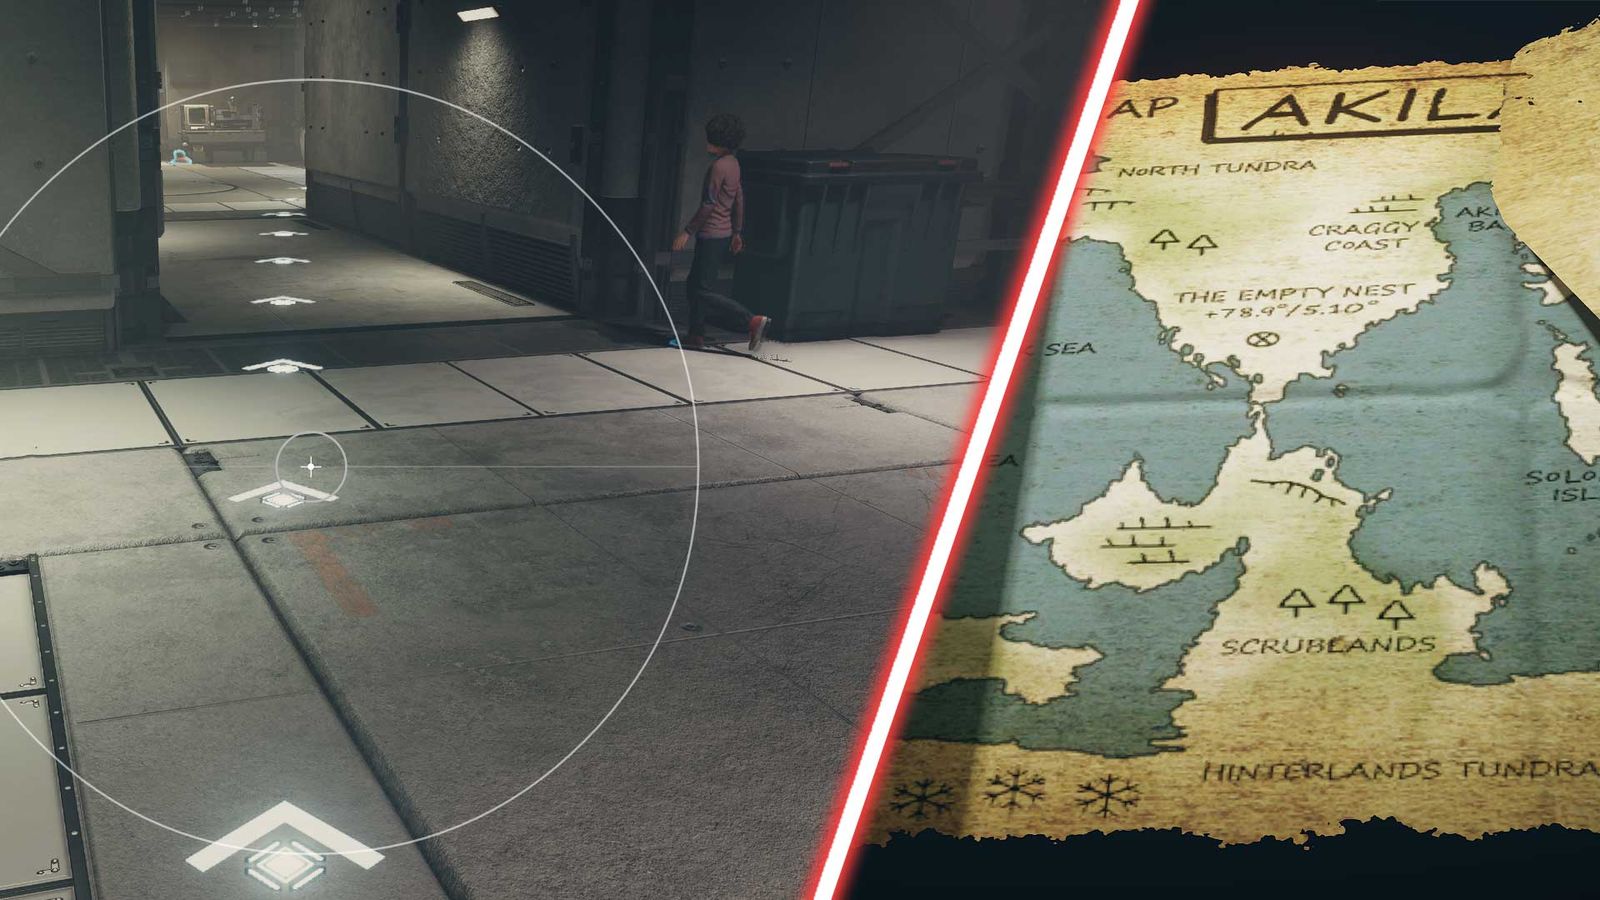 A photo showing Starfield waypoint paths next to a picture of a map.